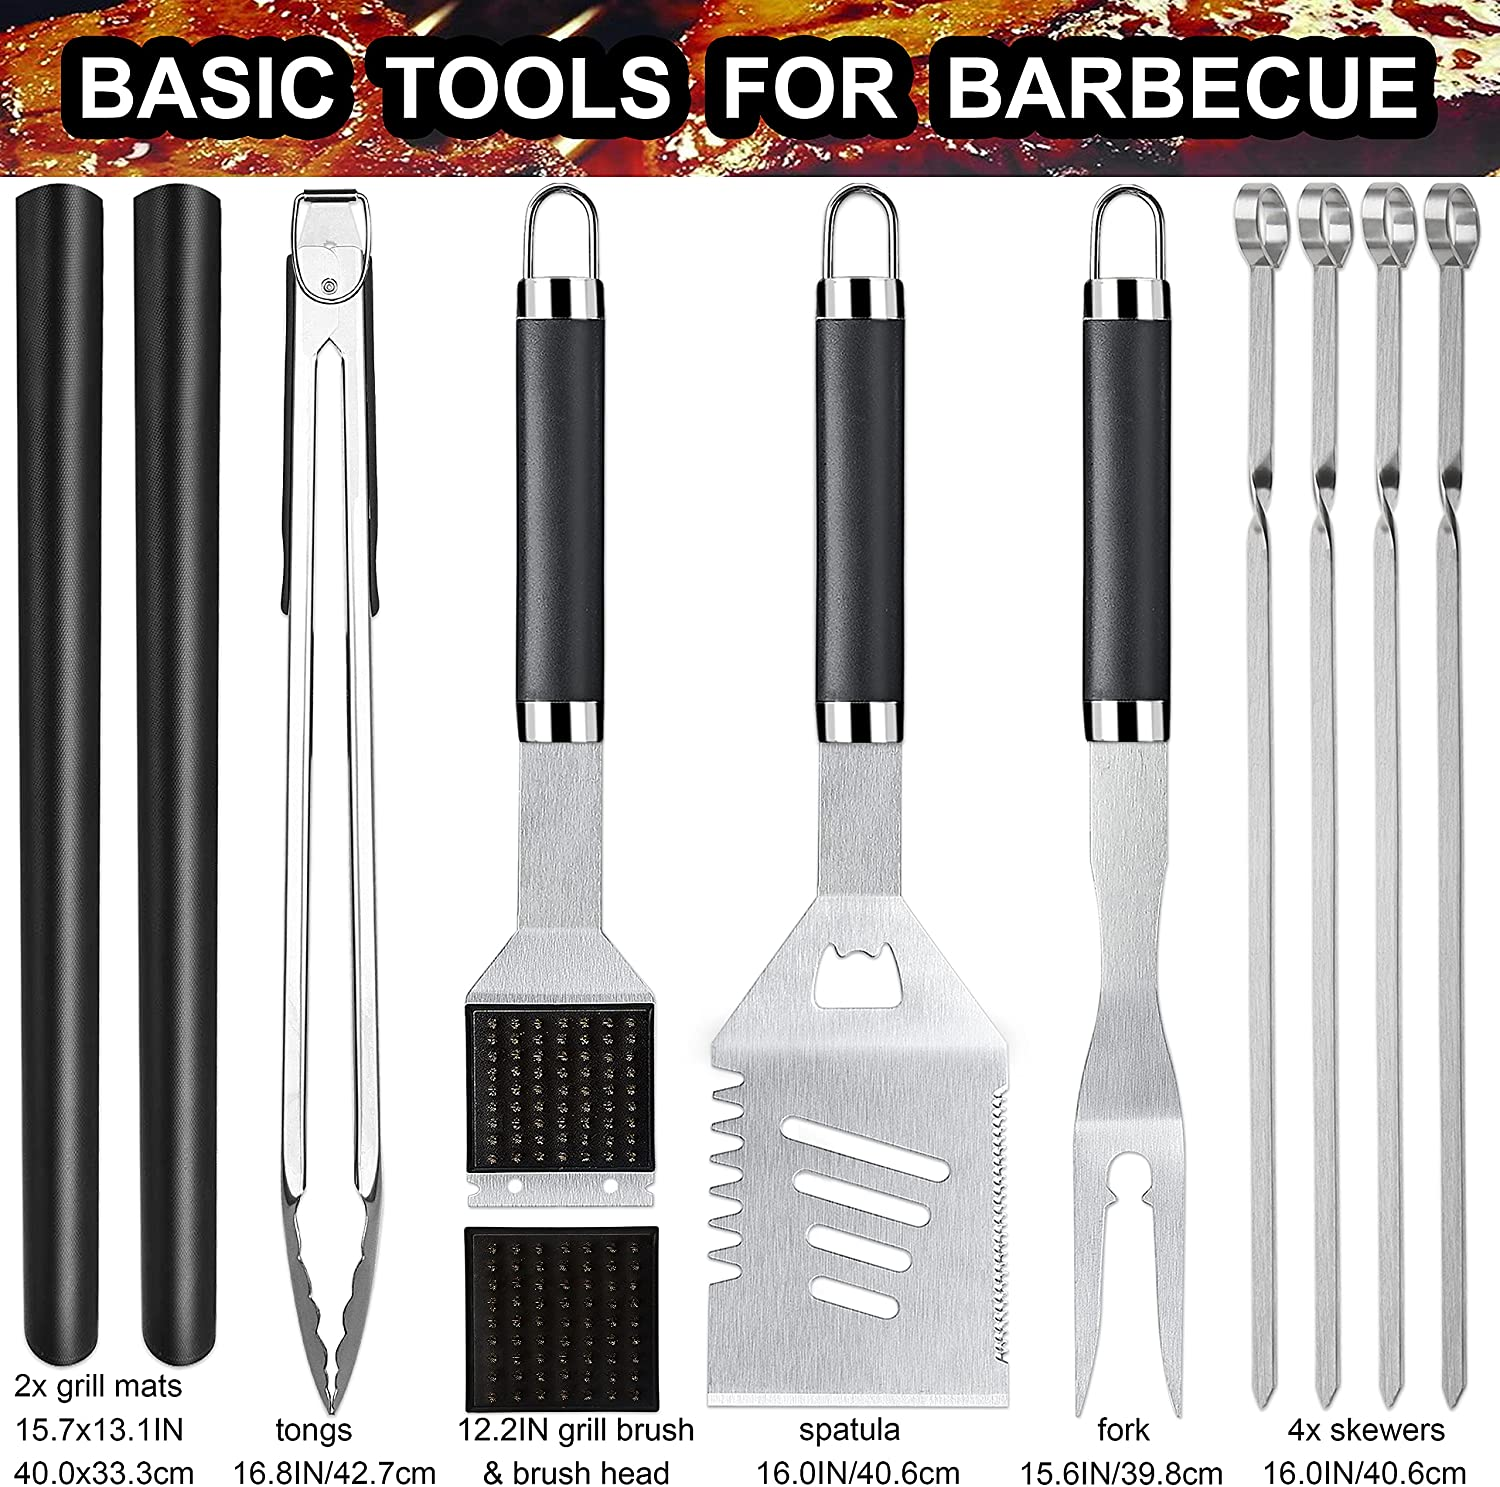 Grill Tools Set - Bbq Grill Utensils - Barbecue Grill Accessories